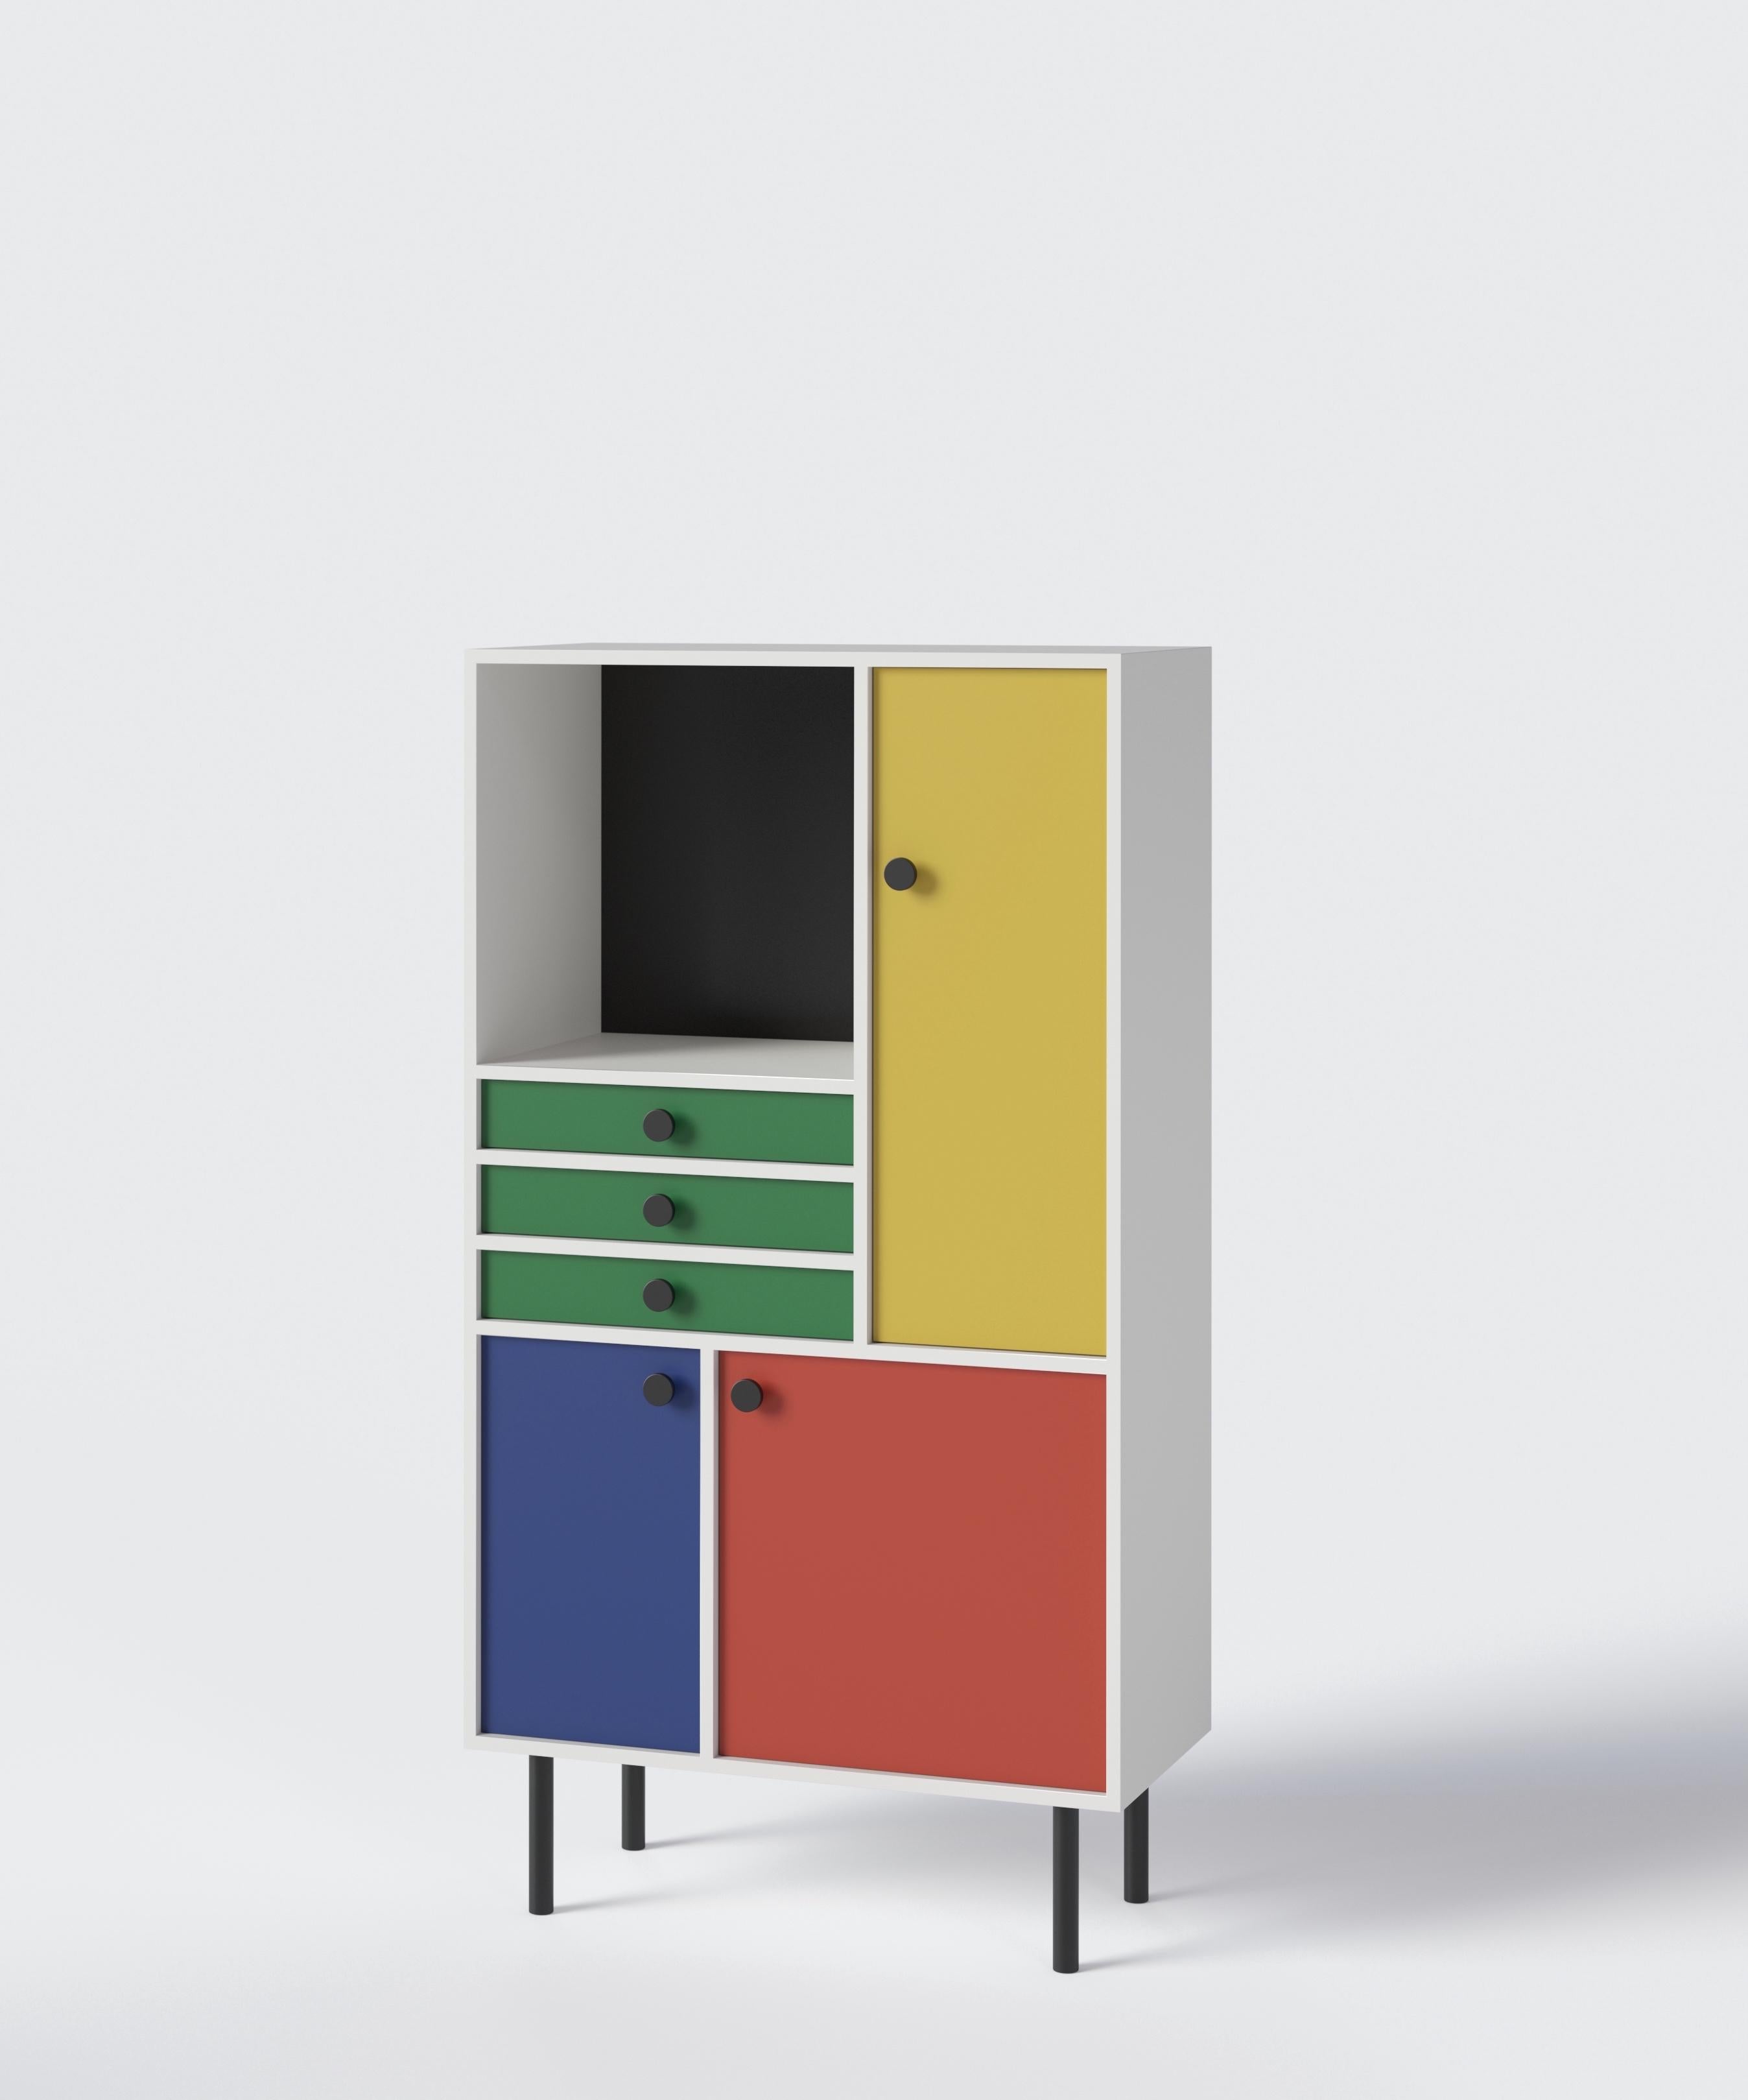 Geometric and Minimalist storage cabinet by Russian designer Dmitry Samygin. Inspired by Bauhaus style. 

High version (141cm)
Or
Low version (97cm)

Plywood
Measures: 146 x 81.6 x 39.5 cm

Choose your color!